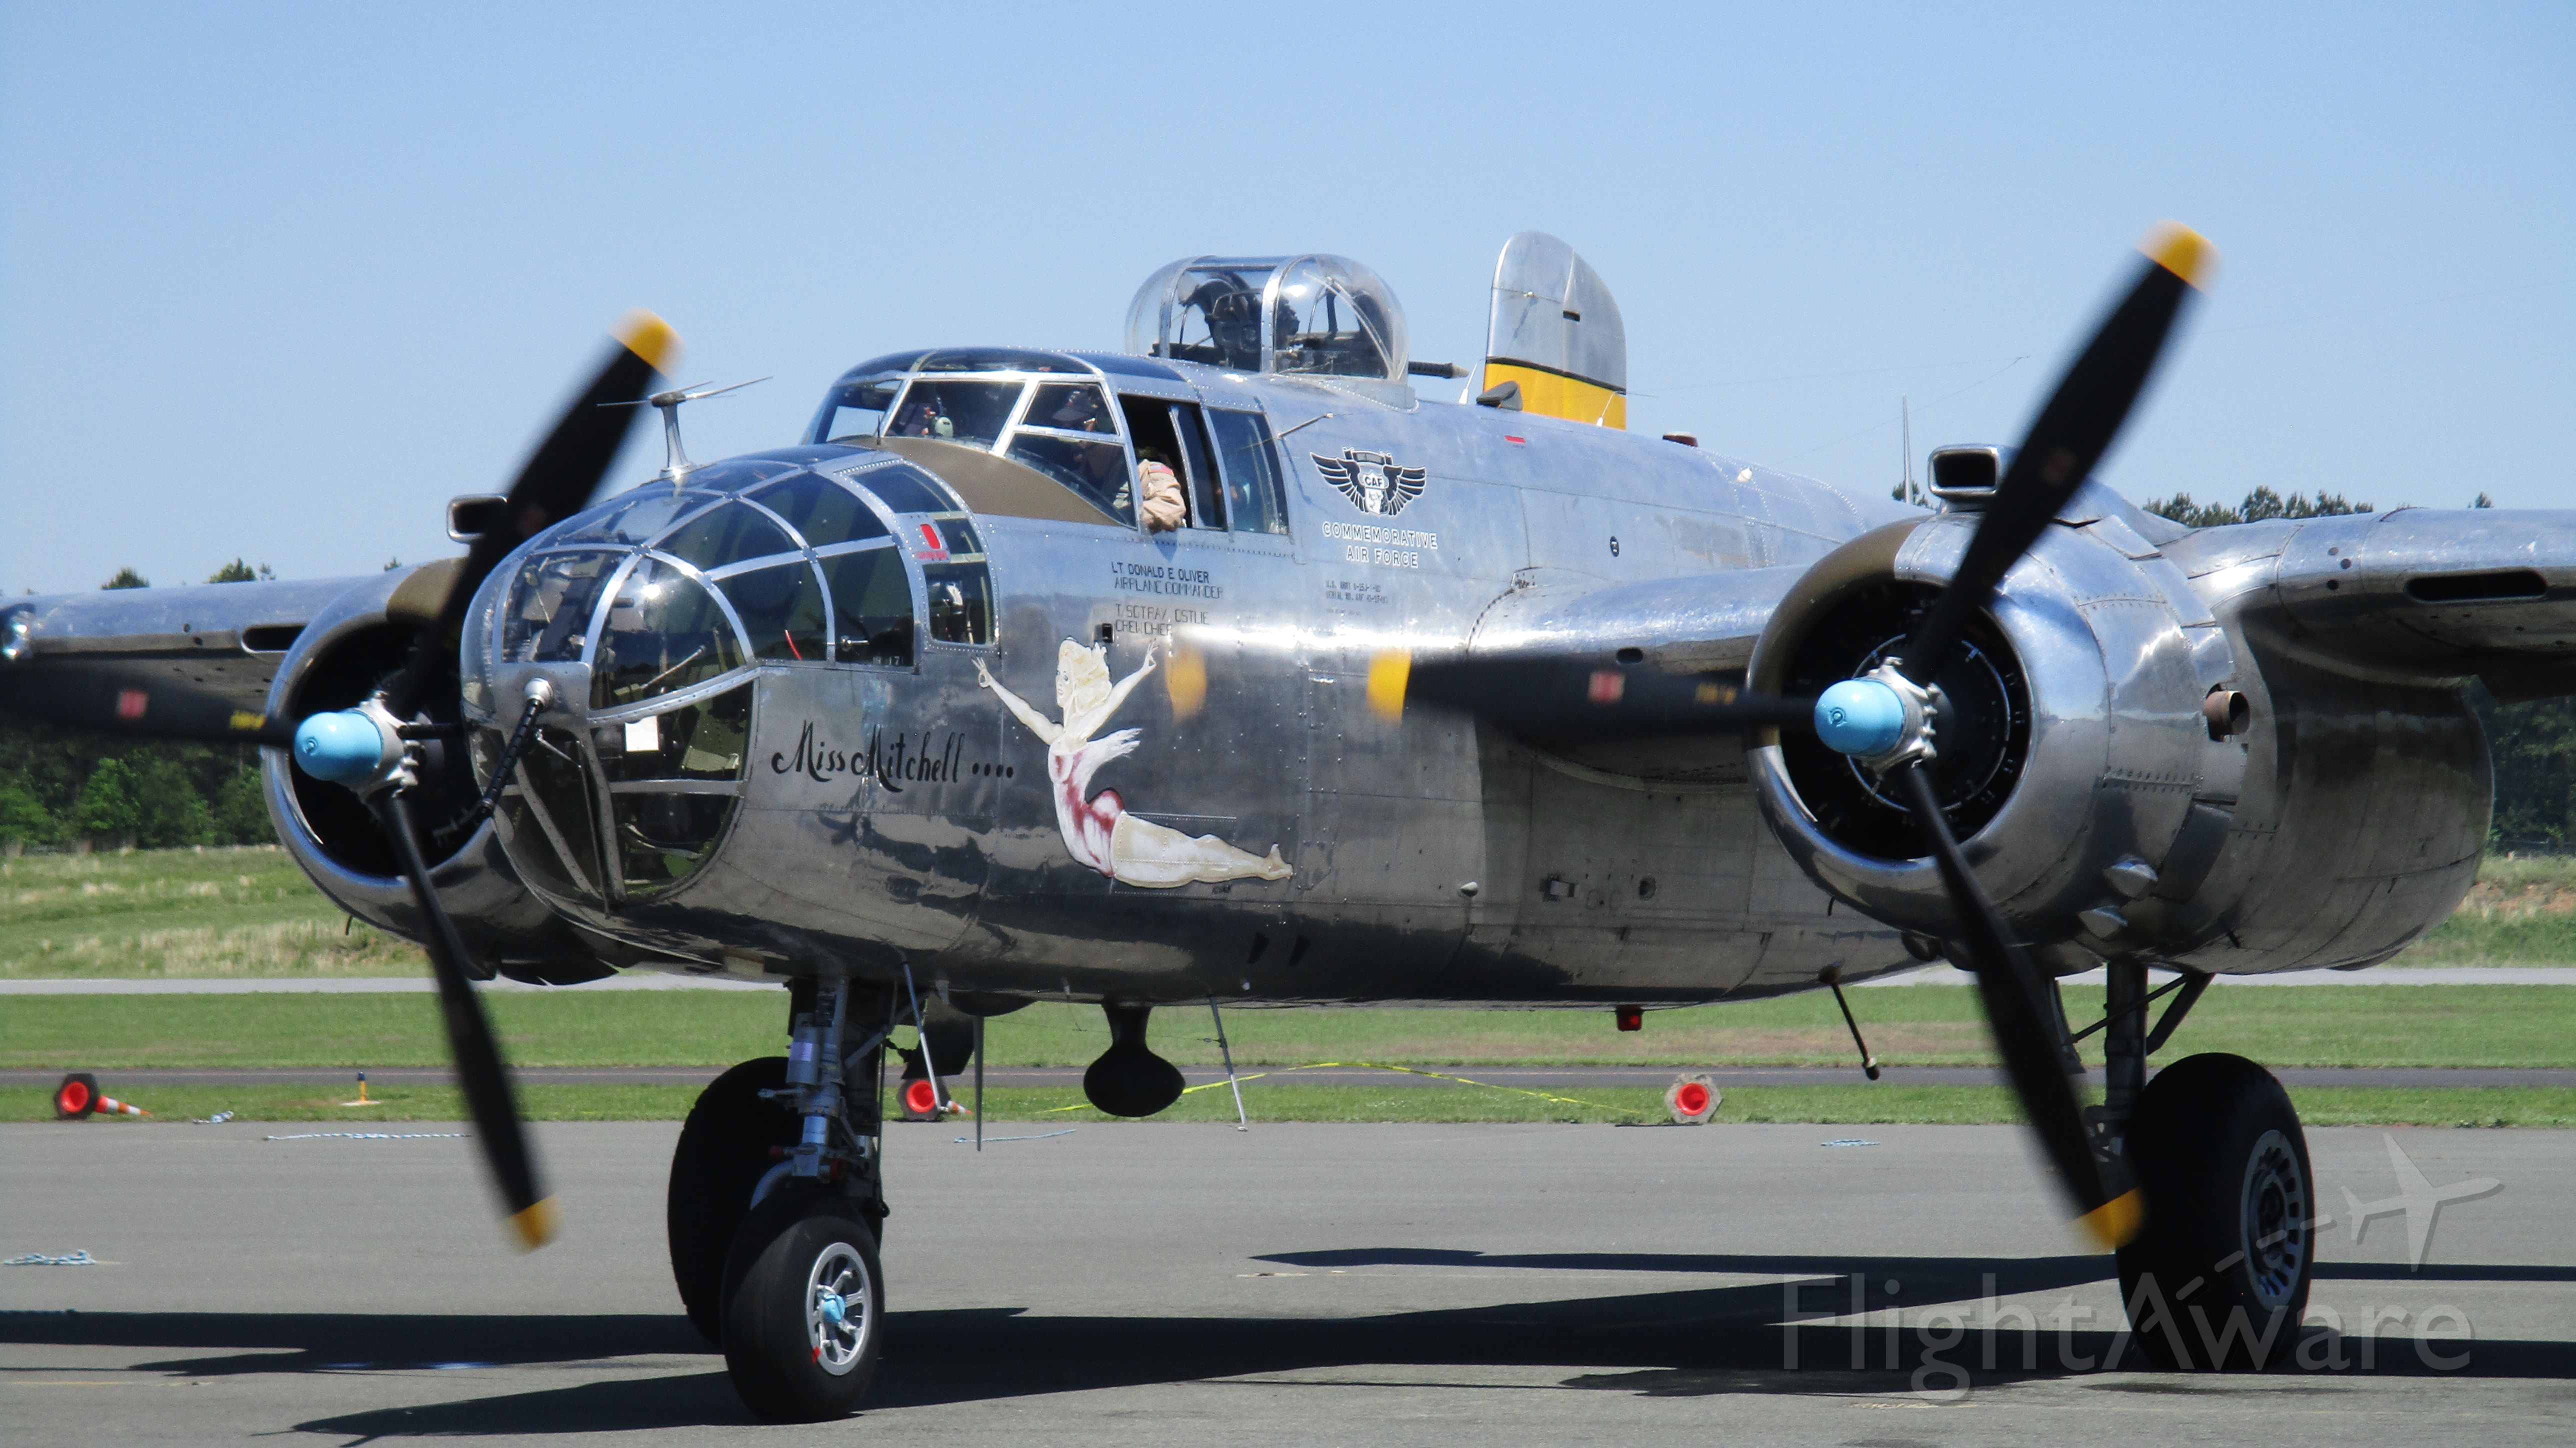 North American TB-25 Mitchell (N27493) - Close up! B-25 "Miss Mitchell" at the Commemorative Air Force fly-in at Raleigh Executive Jetport (TTA), Sanford, NC 5/14/17